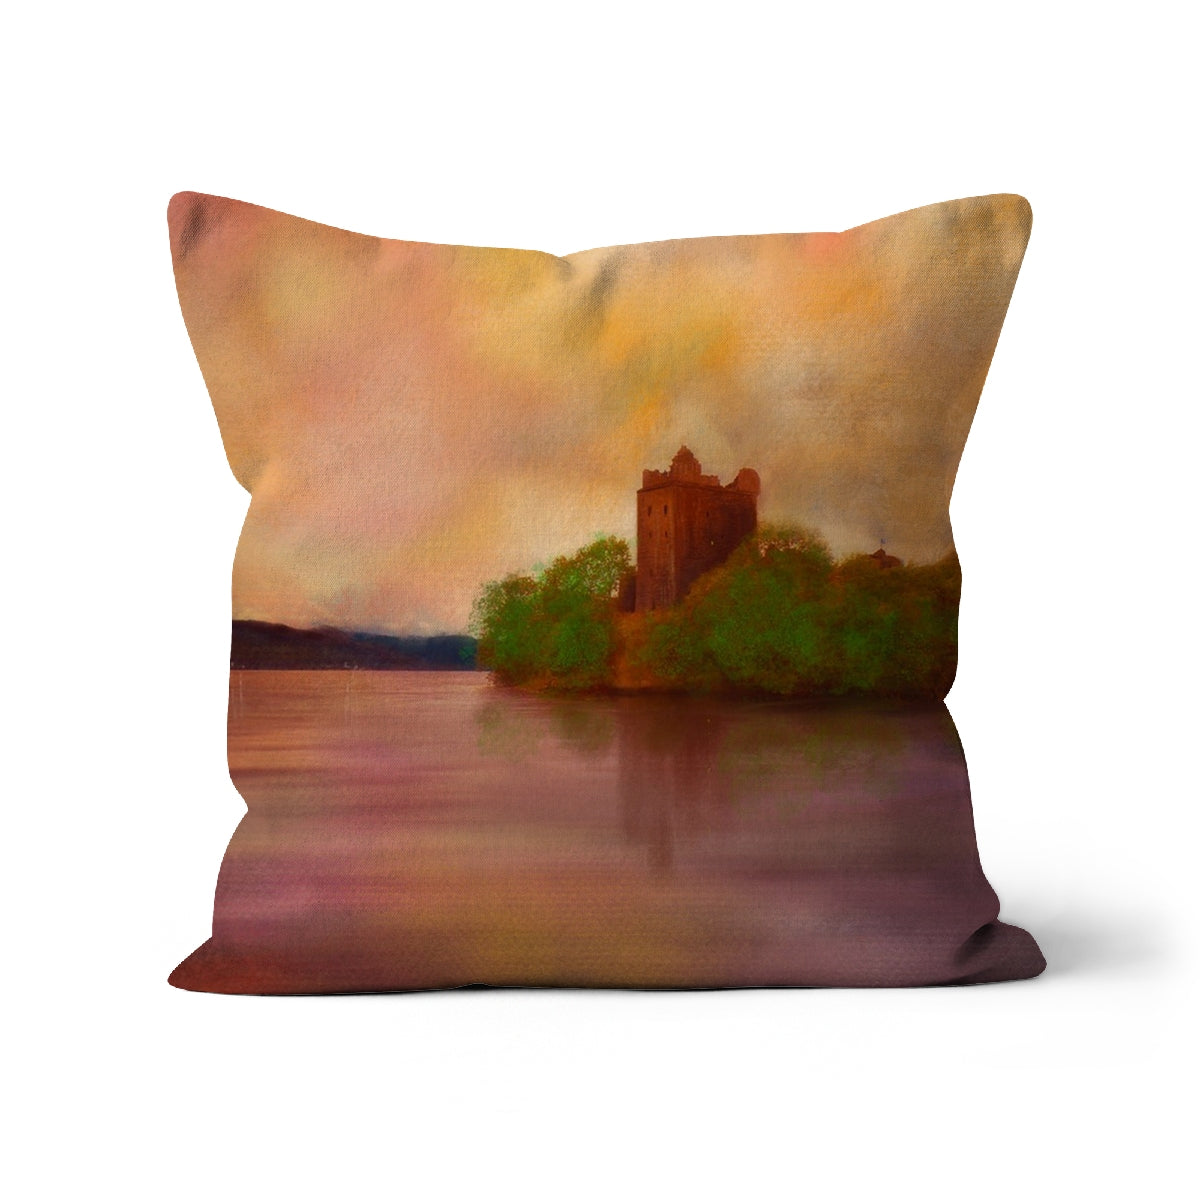 Urquhart Castle Art Gifts Cushion-Cushions-Historic & Iconic Scotland Art Gallery-Linen-24"x24"-Paintings, Prints, Homeware, Art Gifts From Scotland By Scottish Artist Kevin Hunter